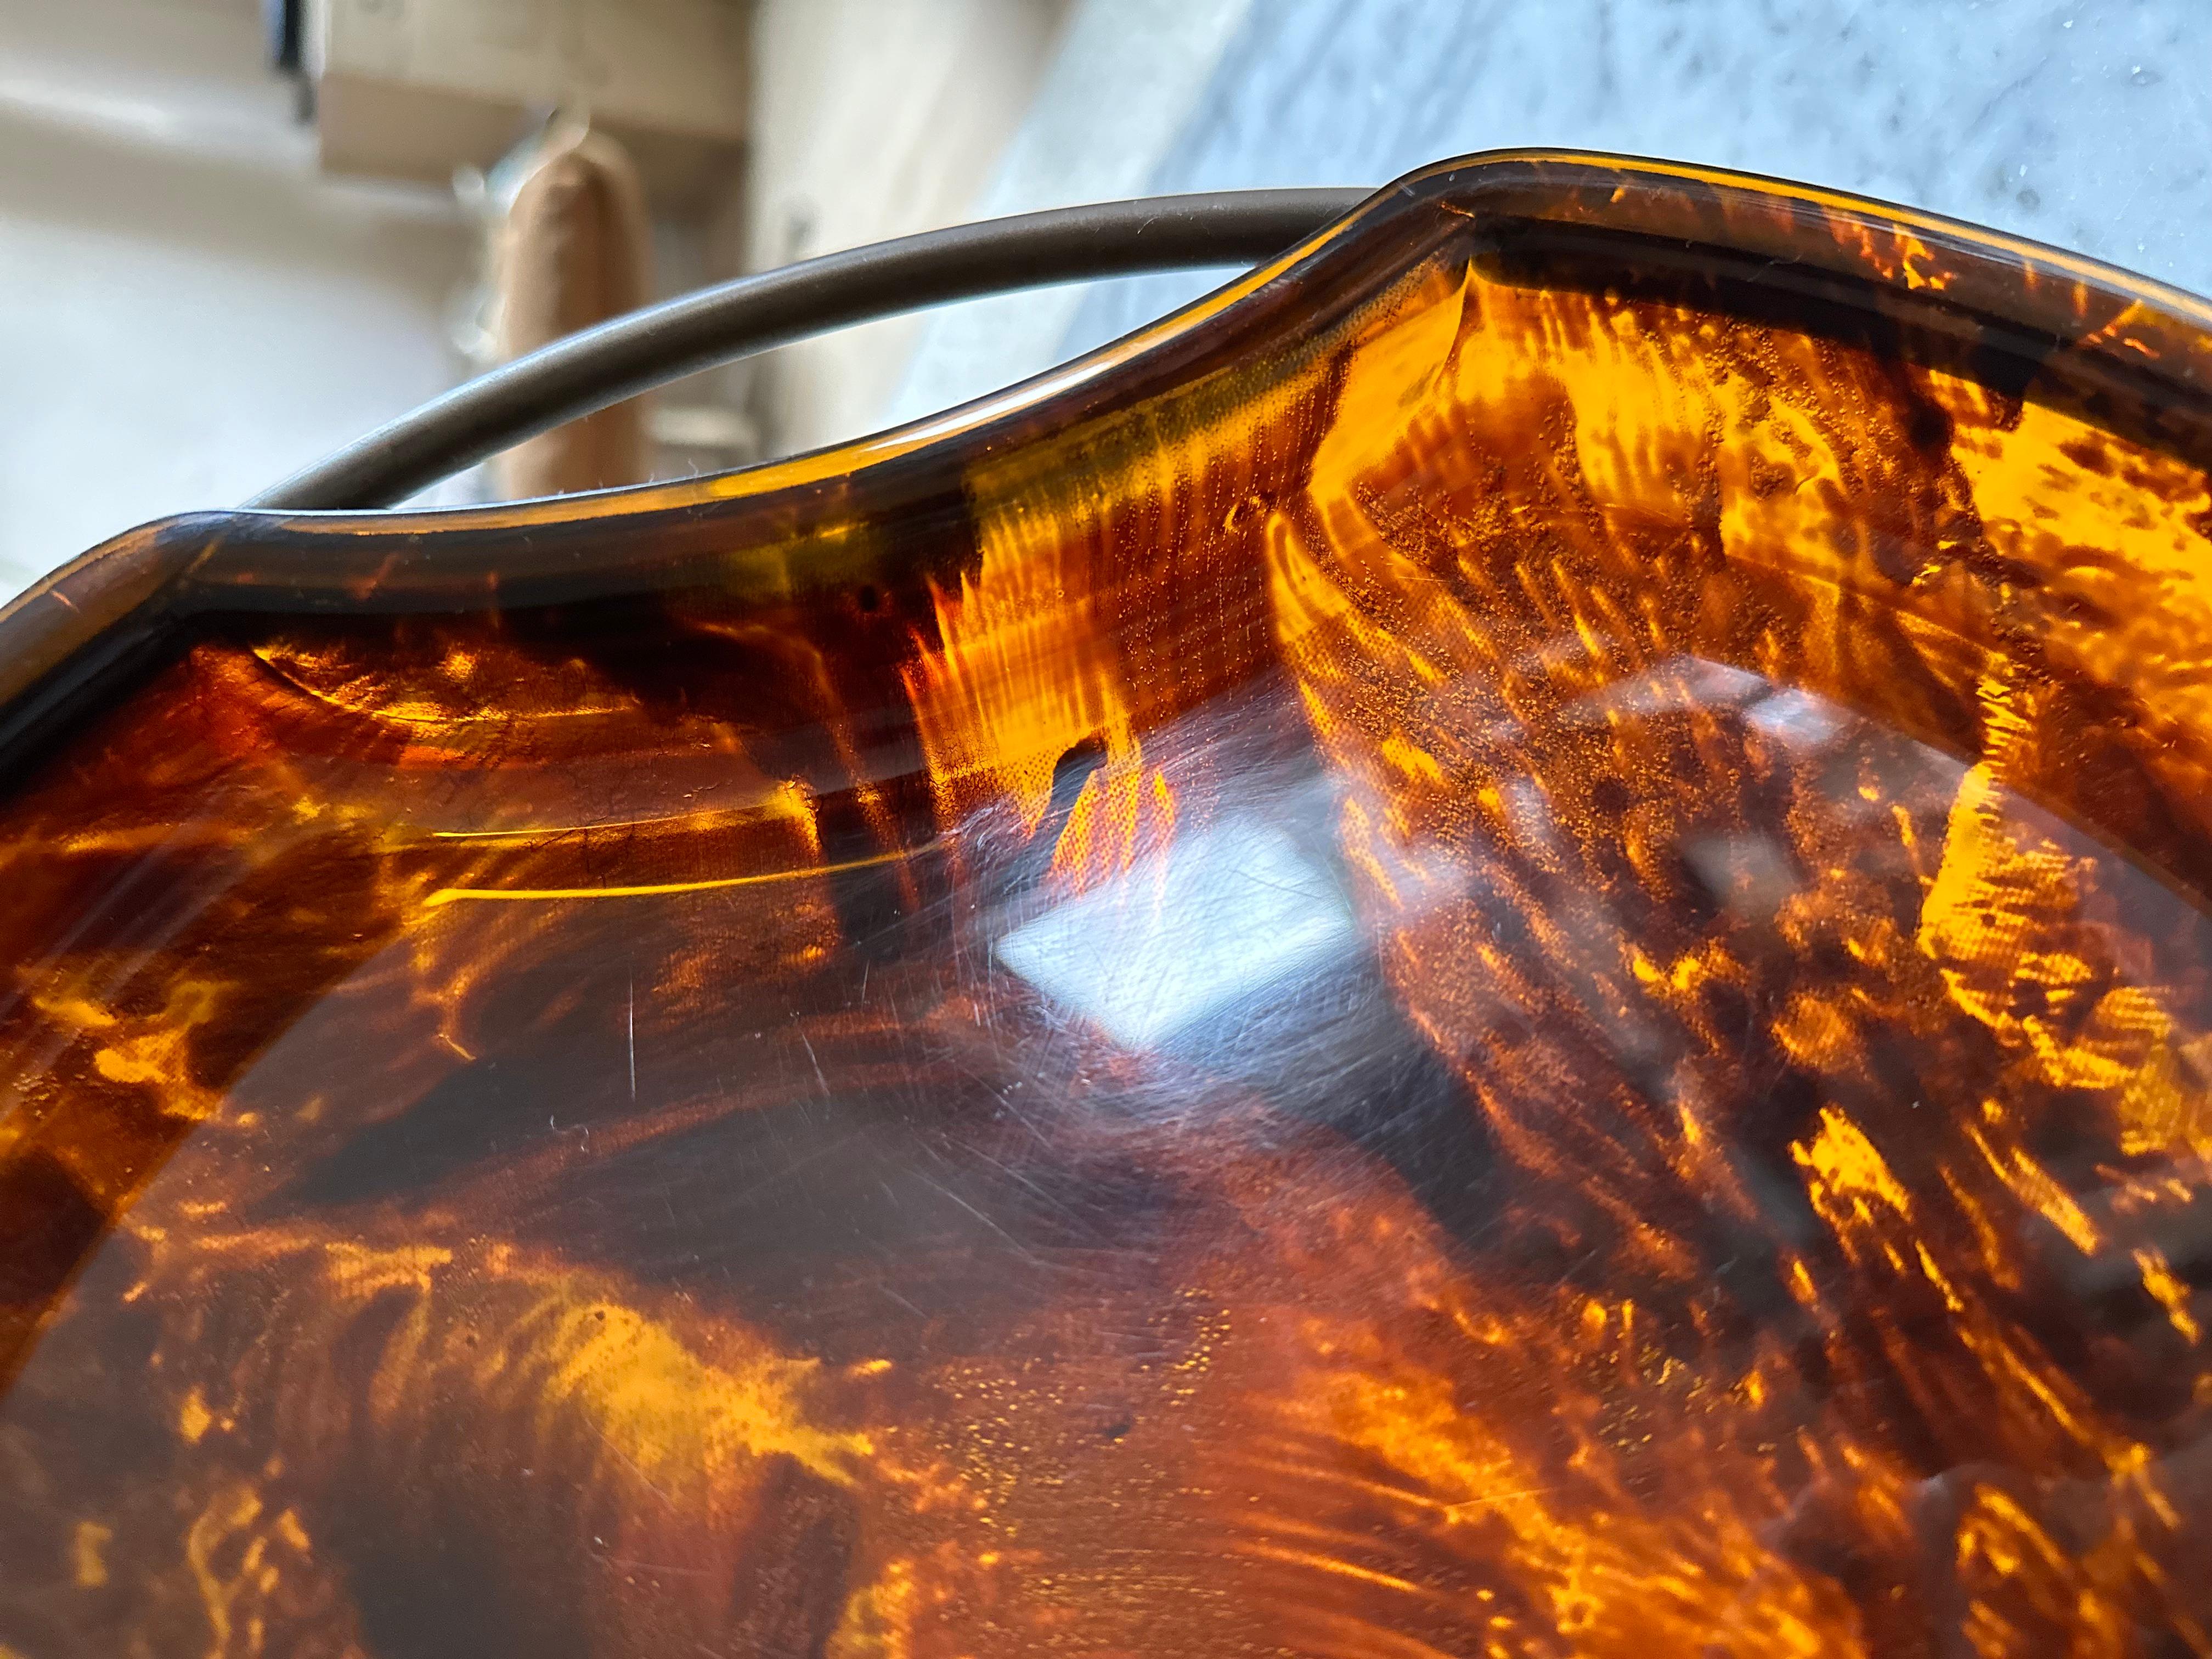  Guzzini’s Oval Lucite Serving Tray from 1970s Italy – Faux Tortoiseshell -brass For Sale 3